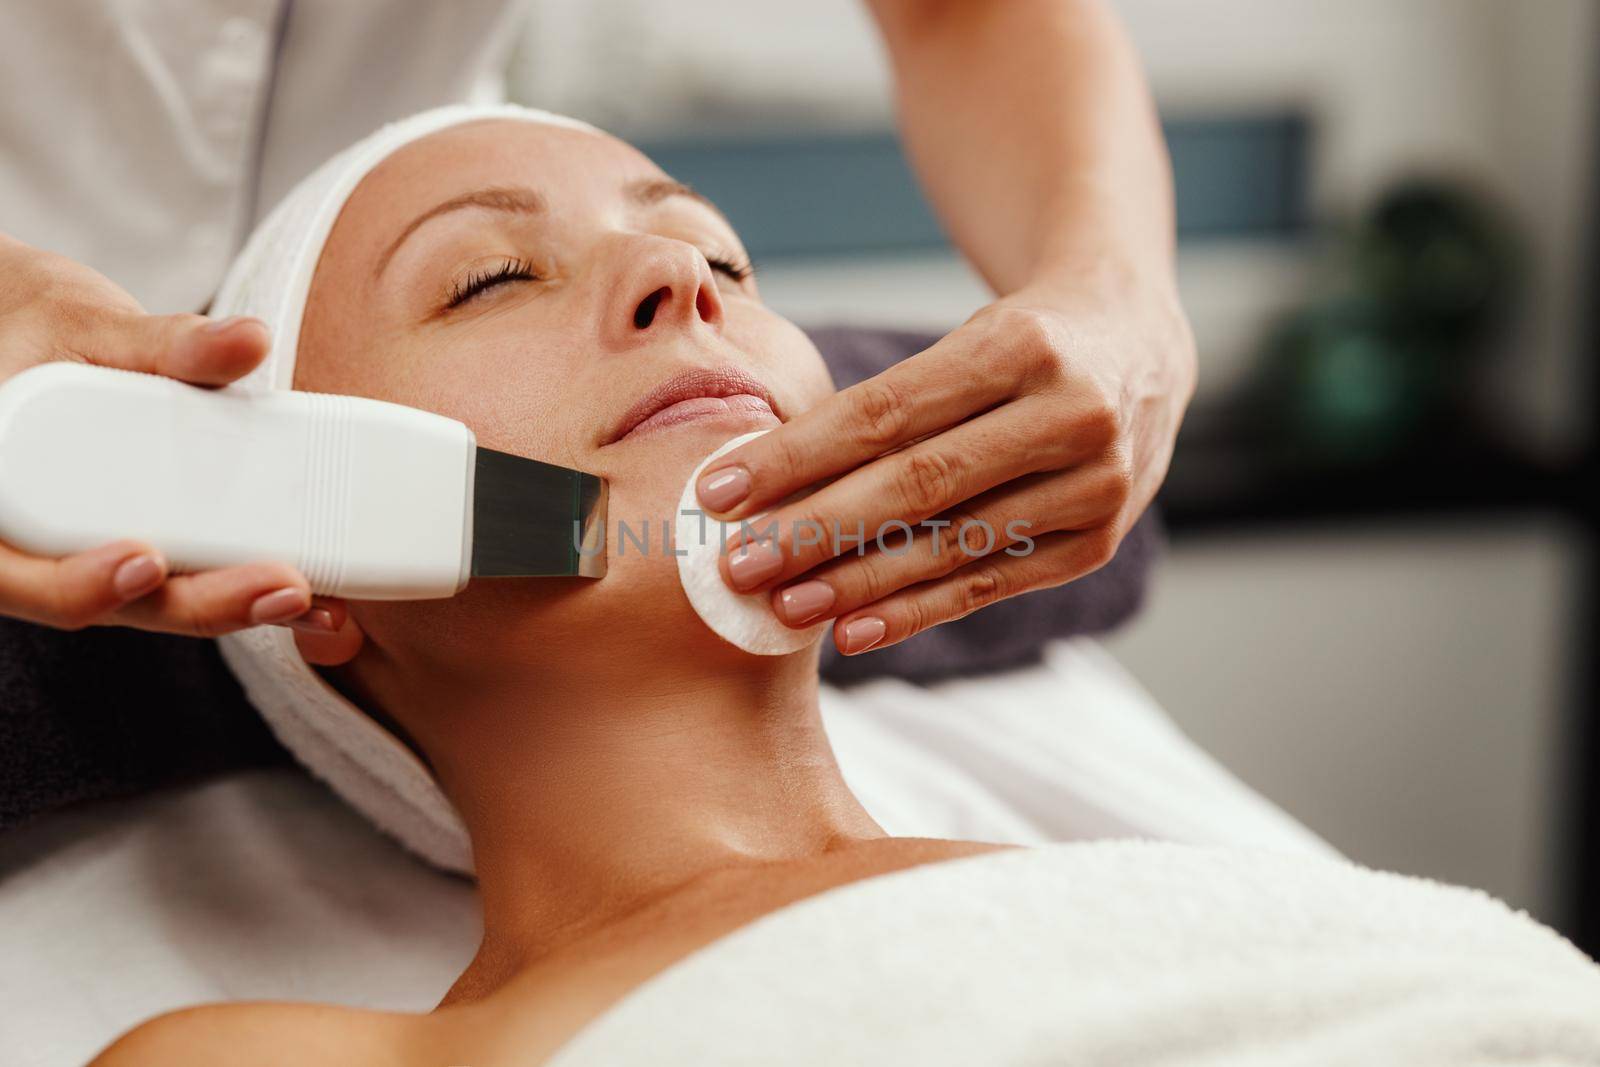 Ultrasonic Facial Cleansing In A Beauty Salon by MilanMarkovic78